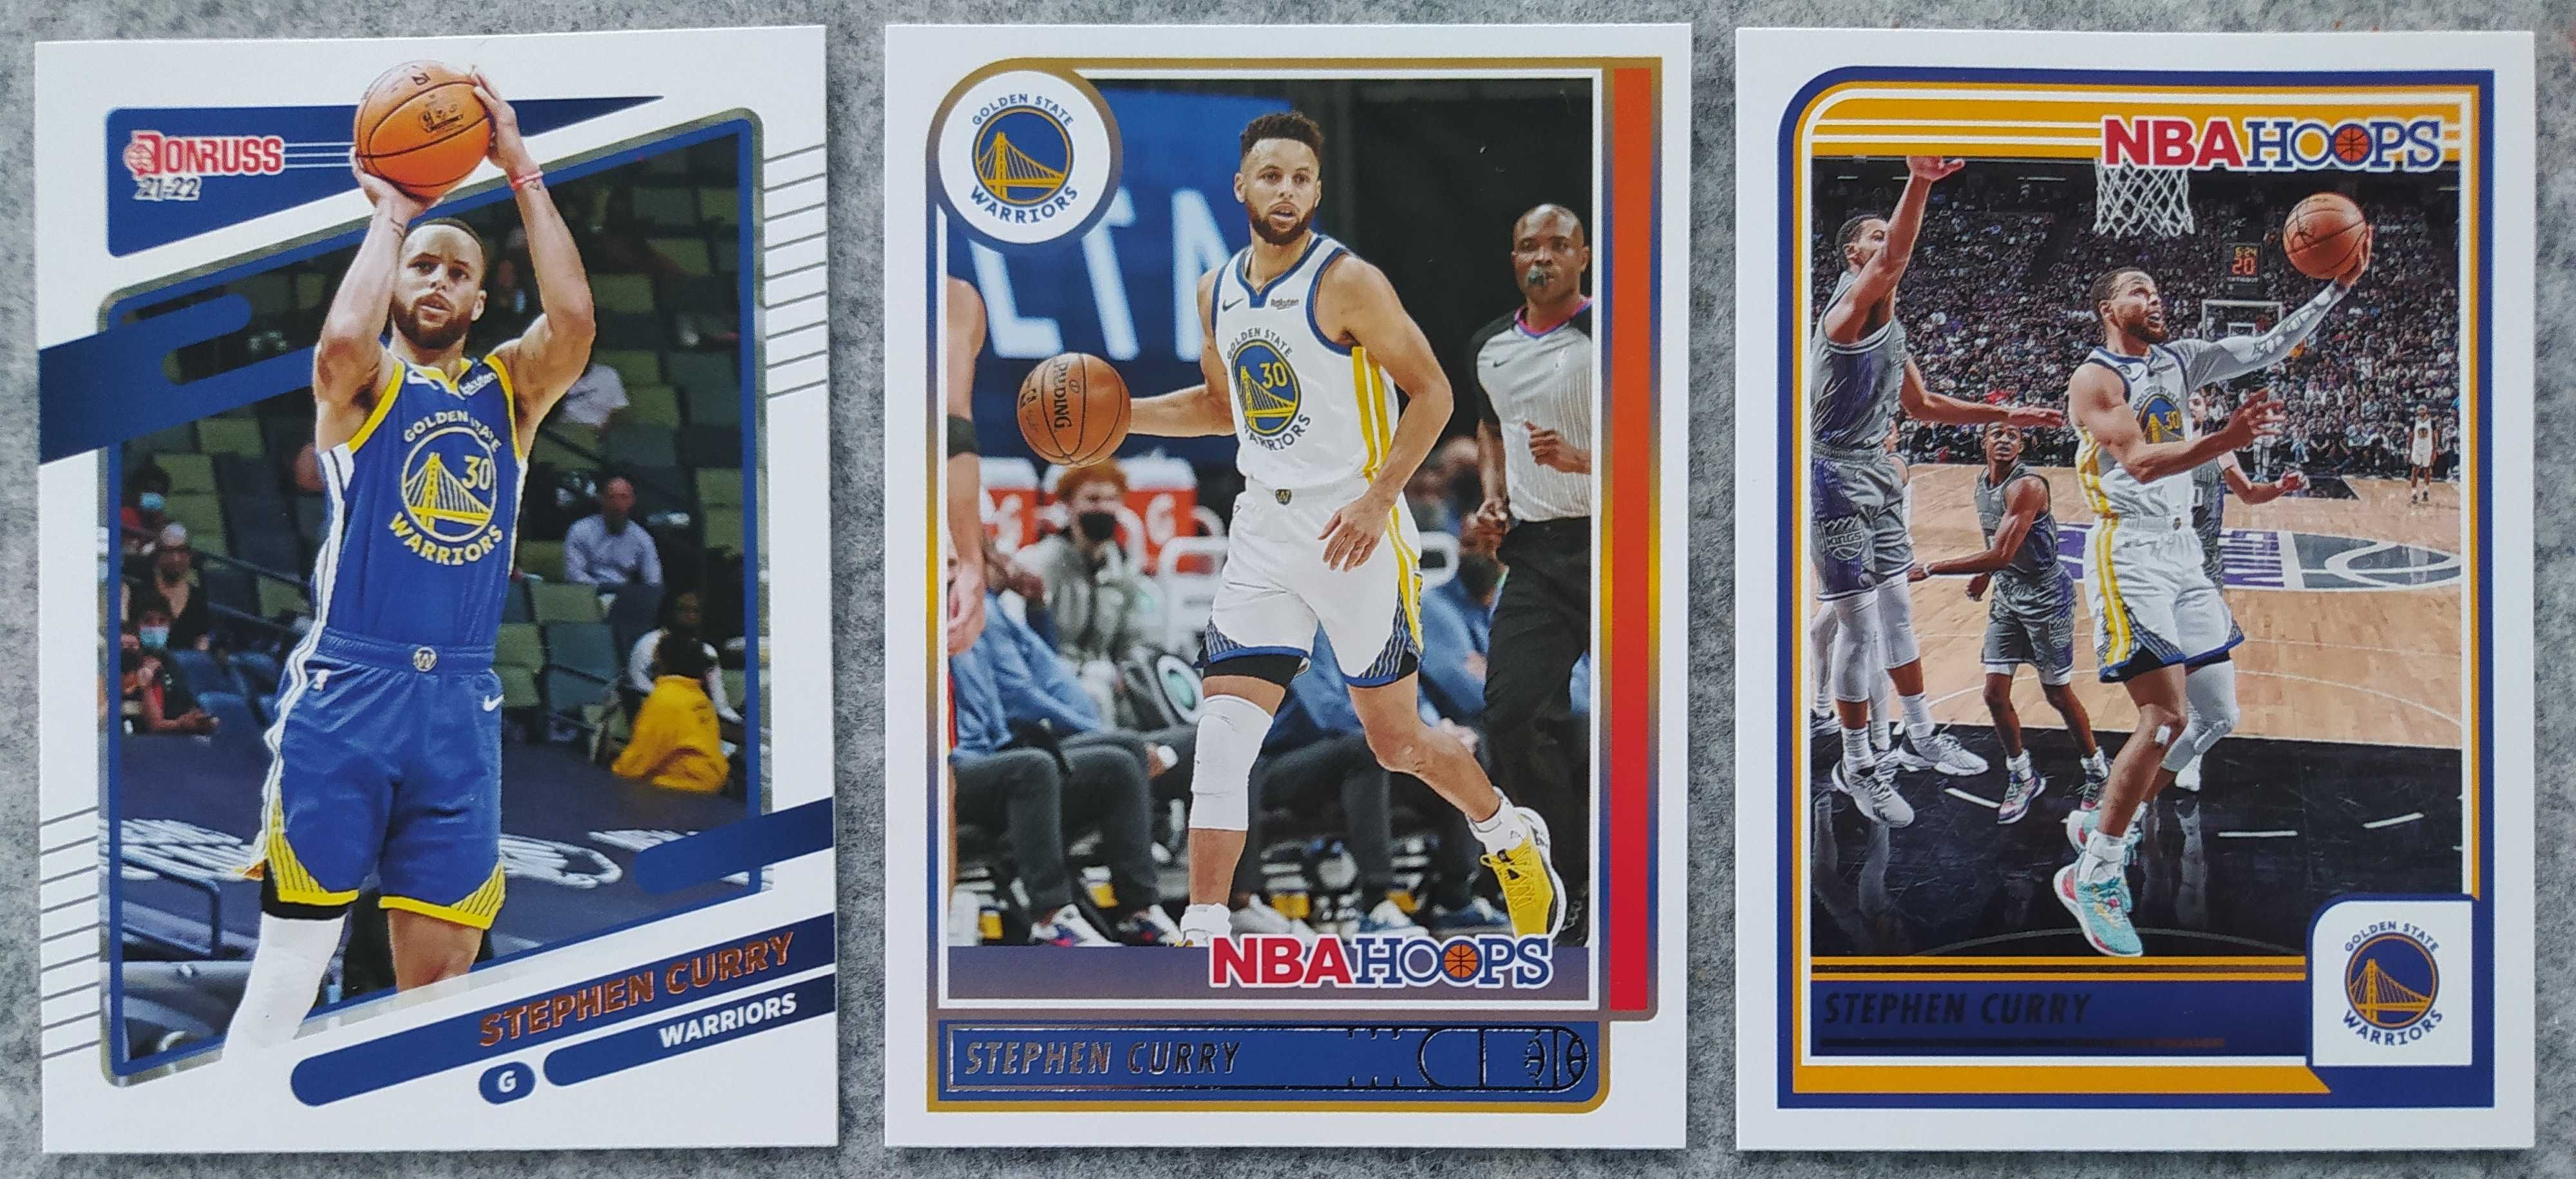 3 karty NBA z nowych serii Stephen Curry Golden State Warriors